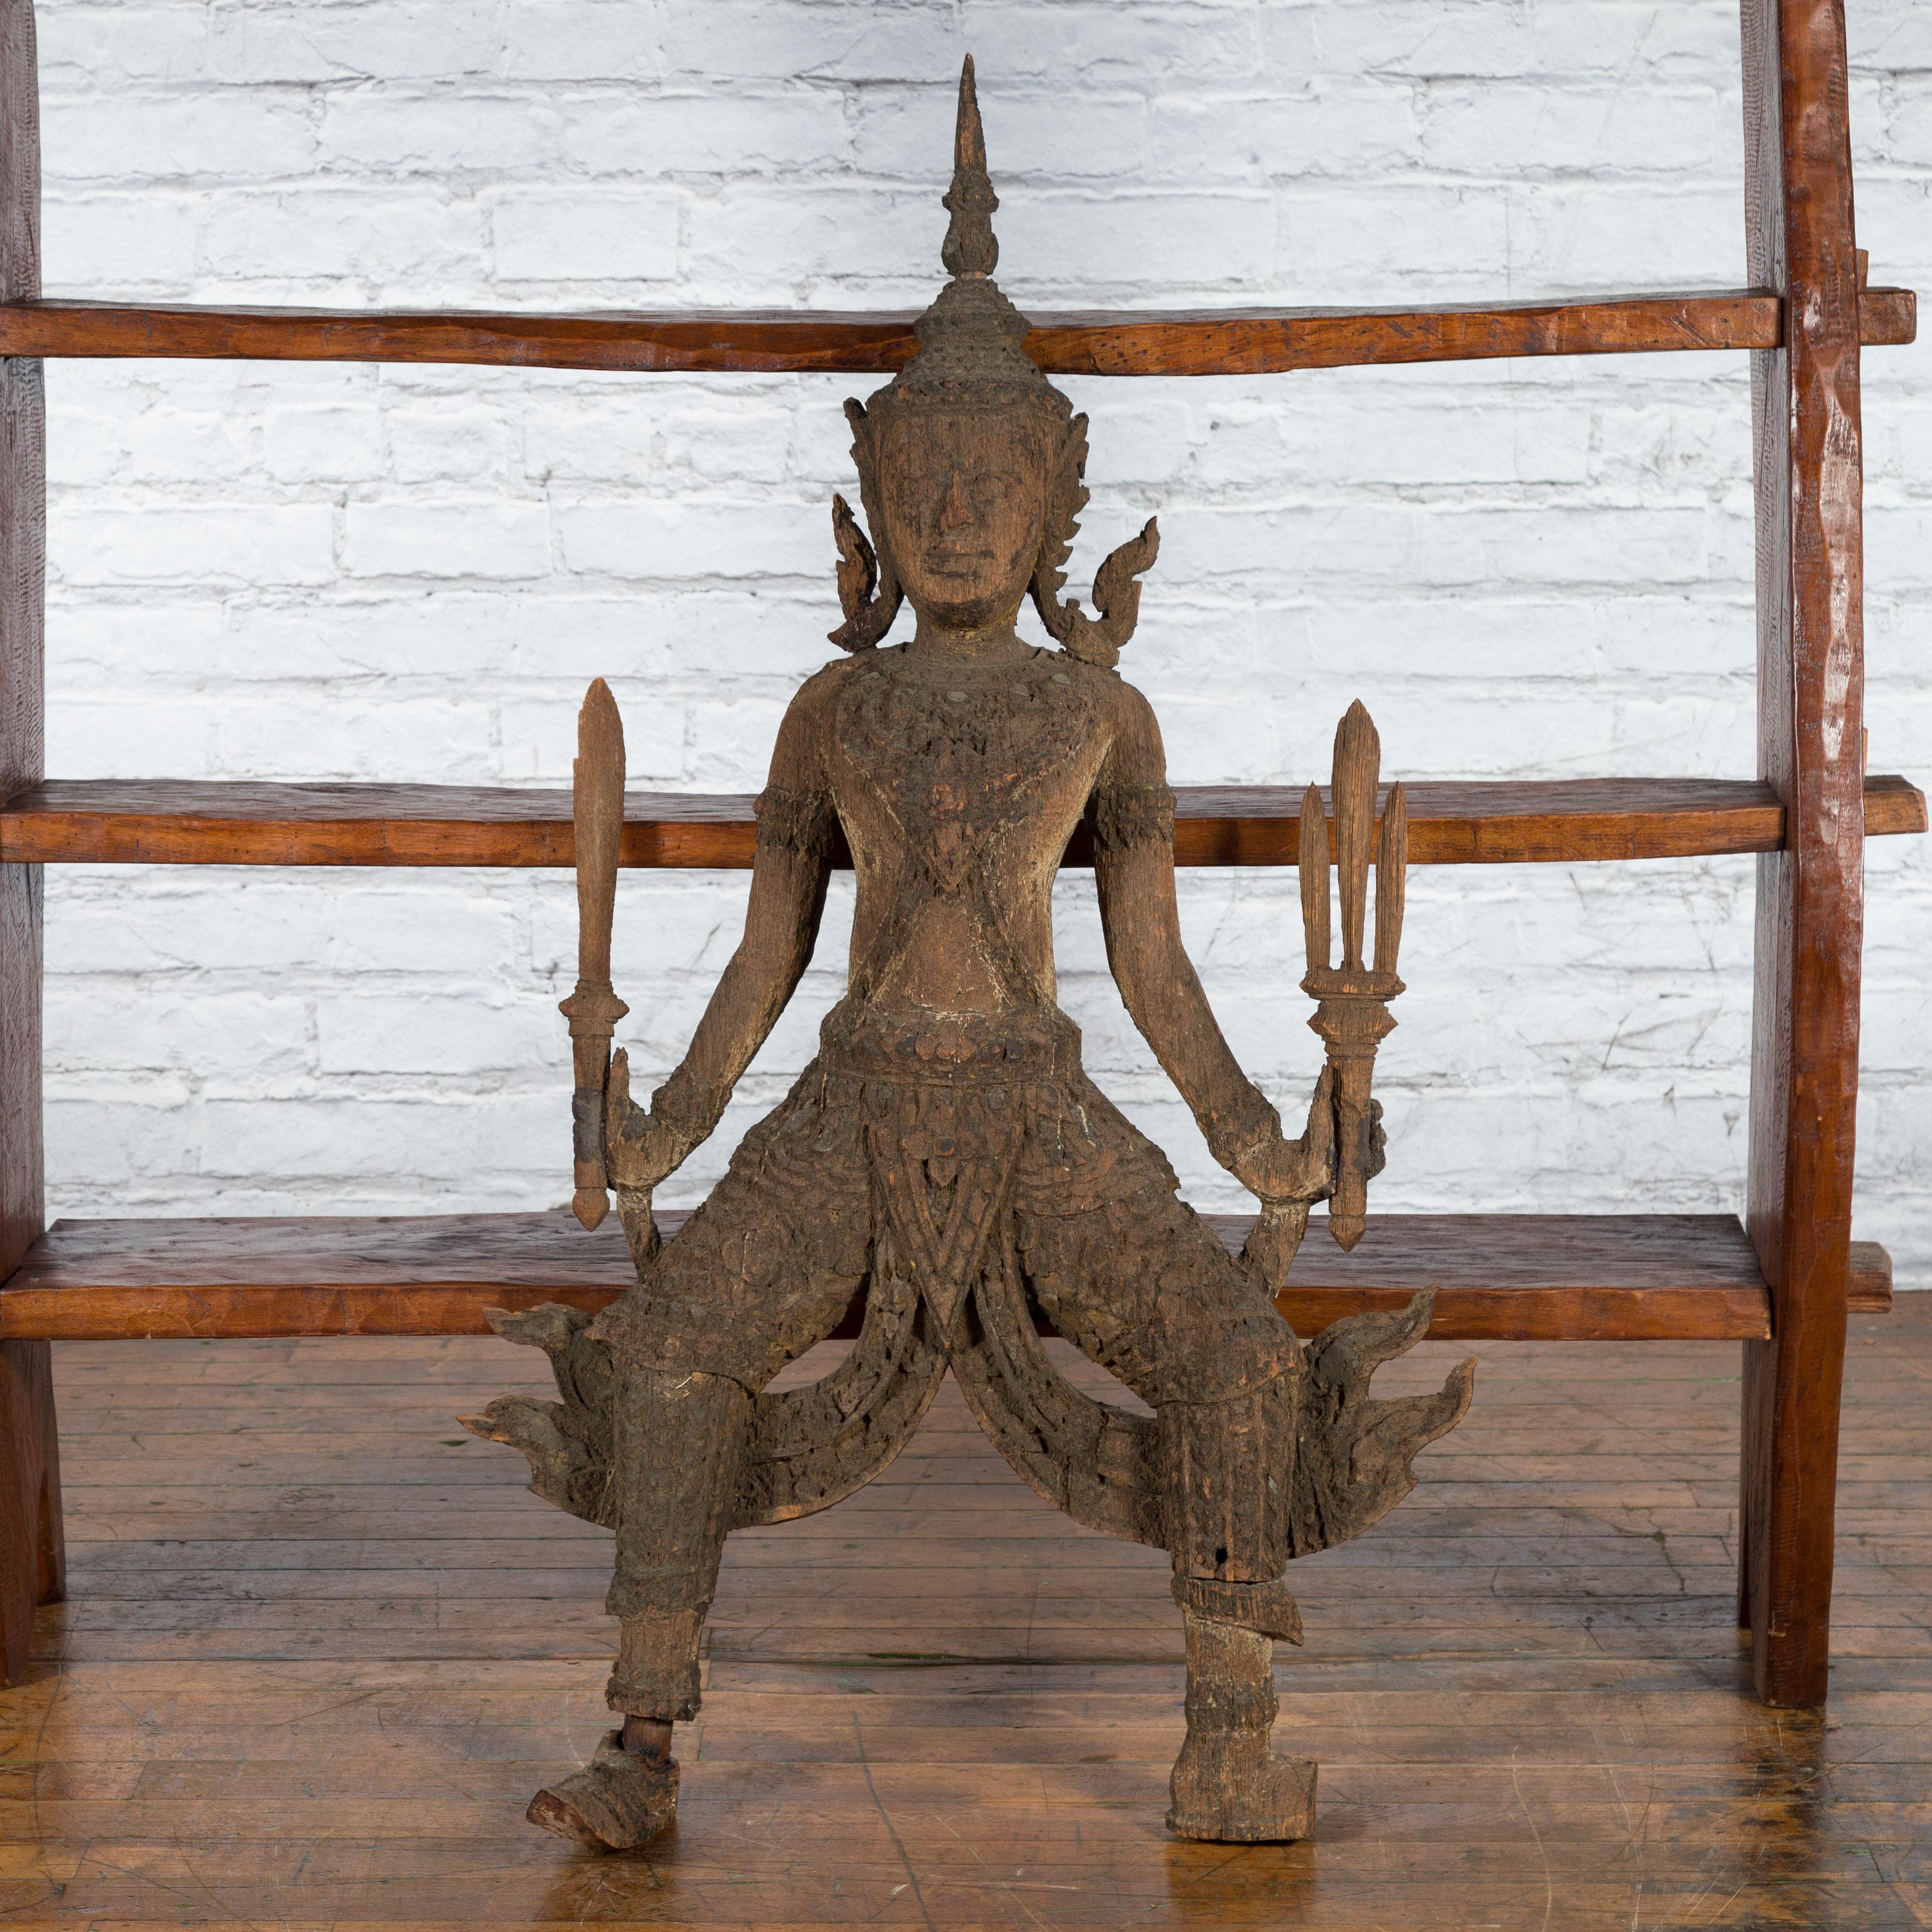 A large hand-carved temple sculpture from the 19th century depicting a Thai warrior holding a sword and a trident, with great distressed appearance. Created in Thailand, this four-foot tall wooden sculpture depicts a Thai warrior ready for battle.